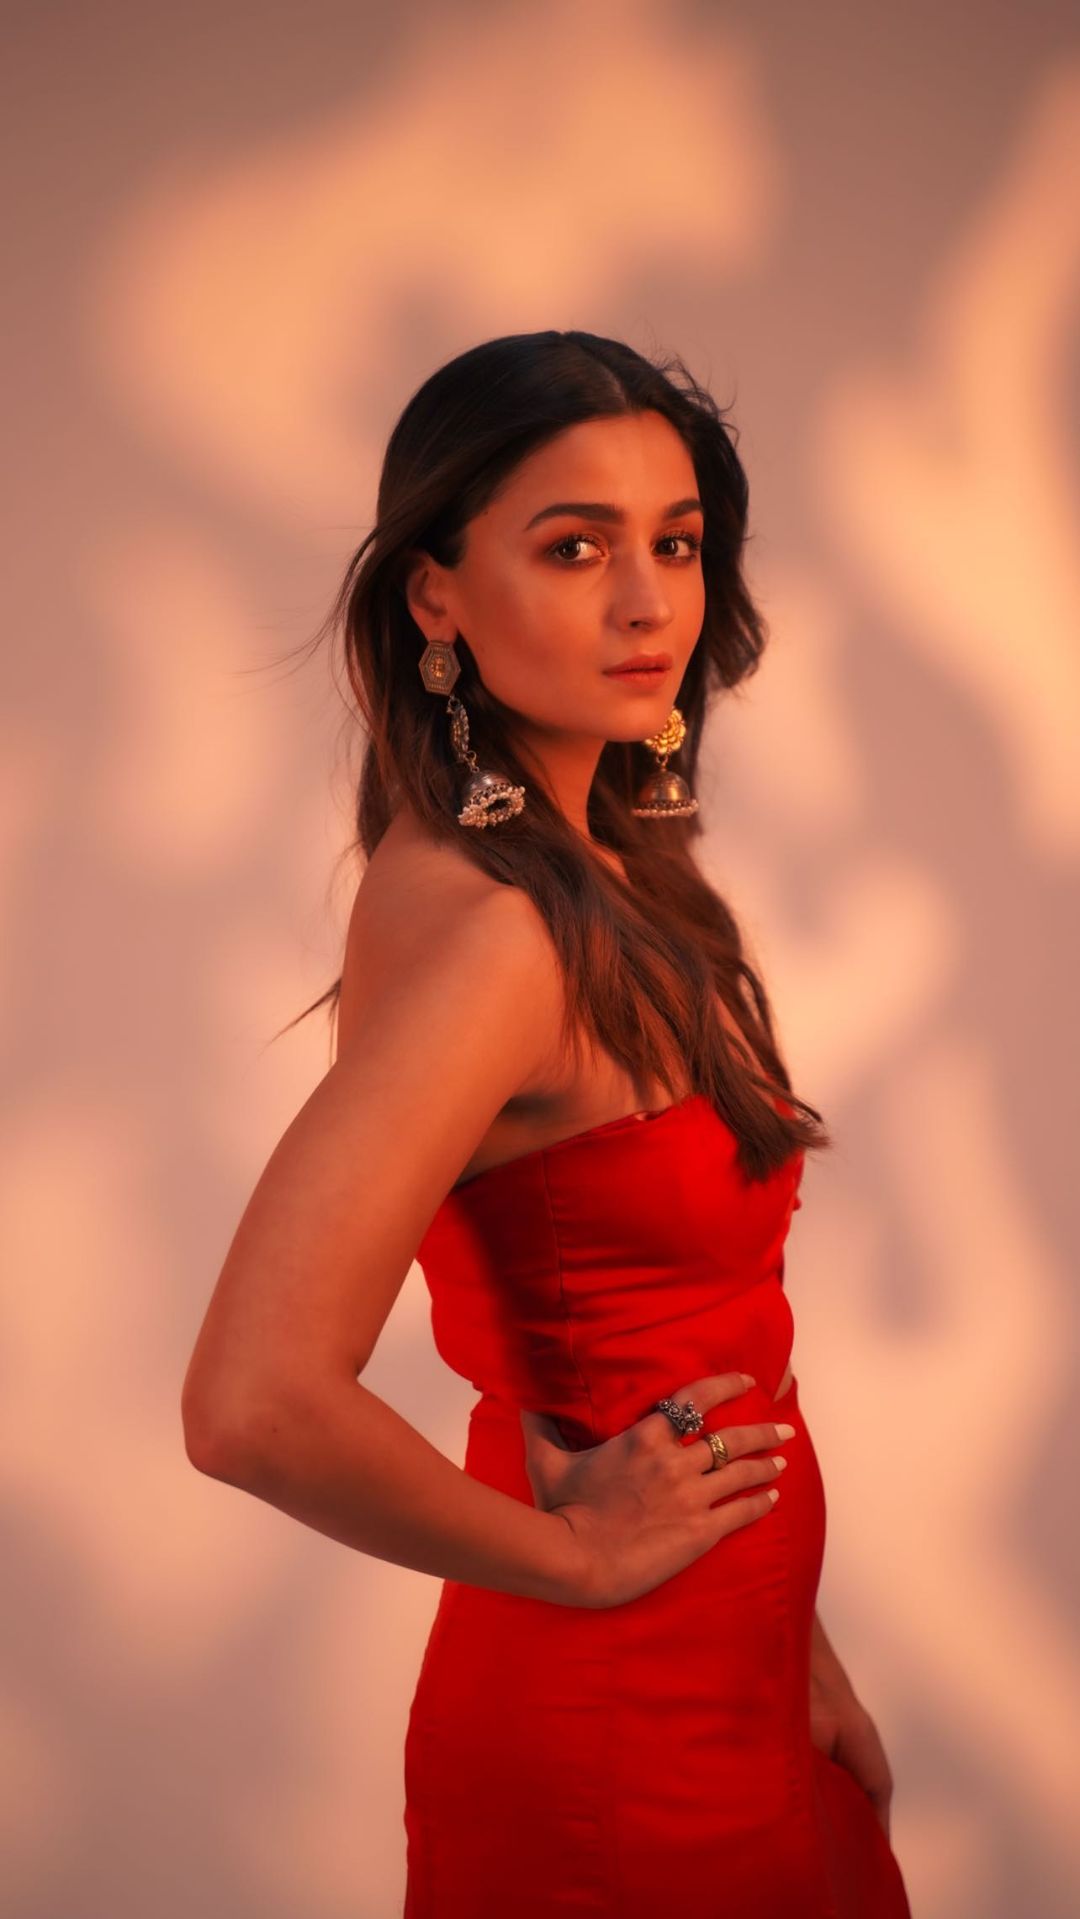 Alia Bhatt Walks The Red Carpet Of The Red Sea International Film Festival  In A Metallic Gown - See Pics